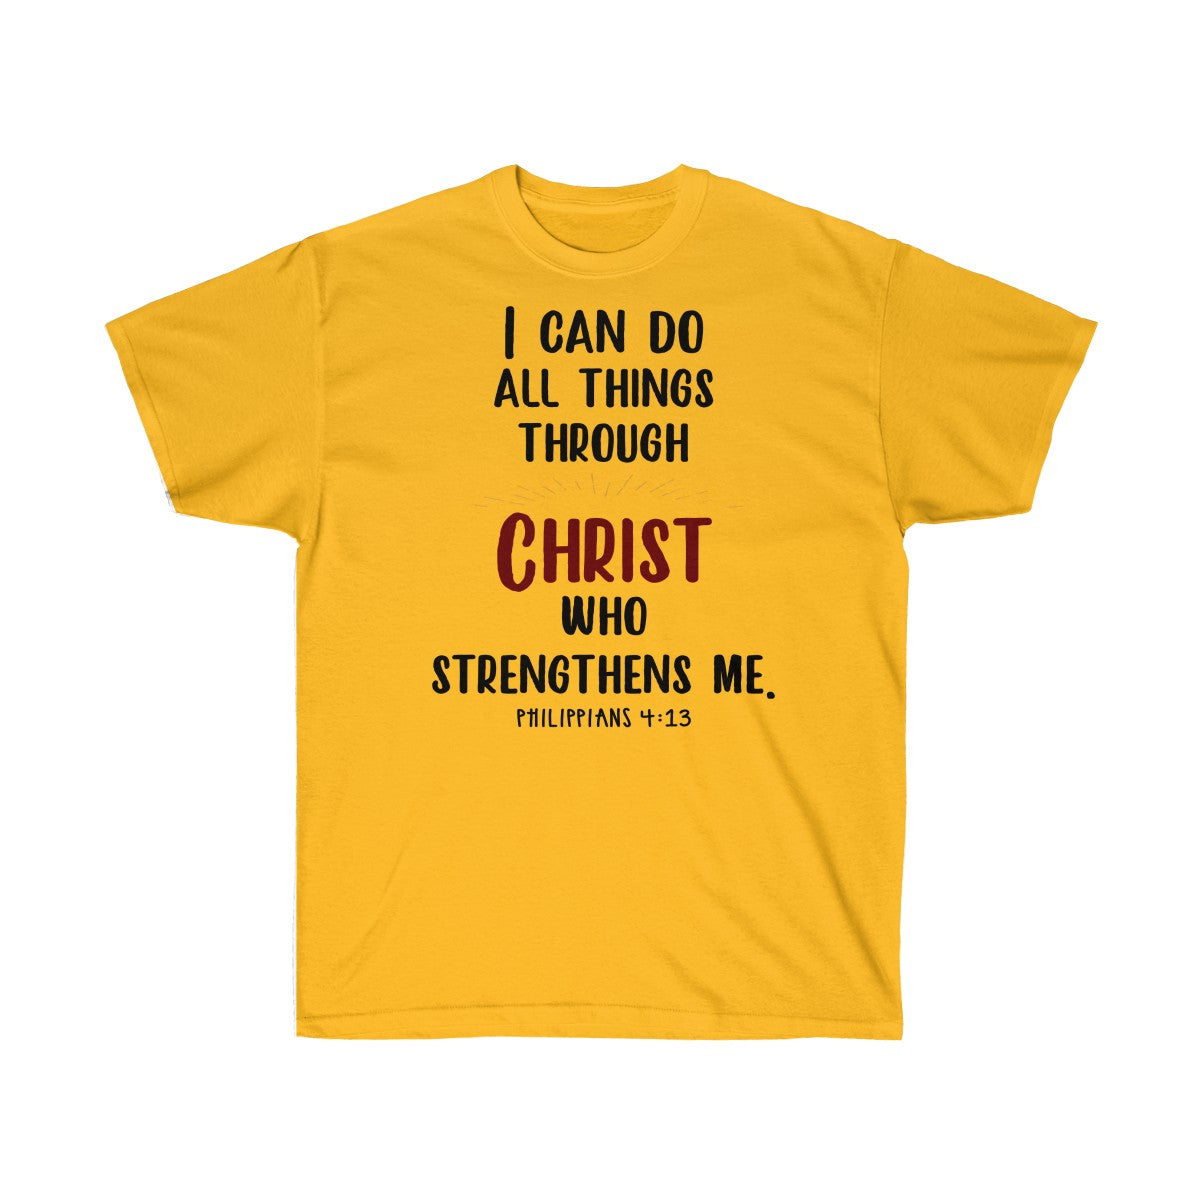 I Can Do All Things Through Christ Who Strengthens Me T-Shirts - Philippians 4 13 Shirts - Tees - Unisex Cotton T-Shirts